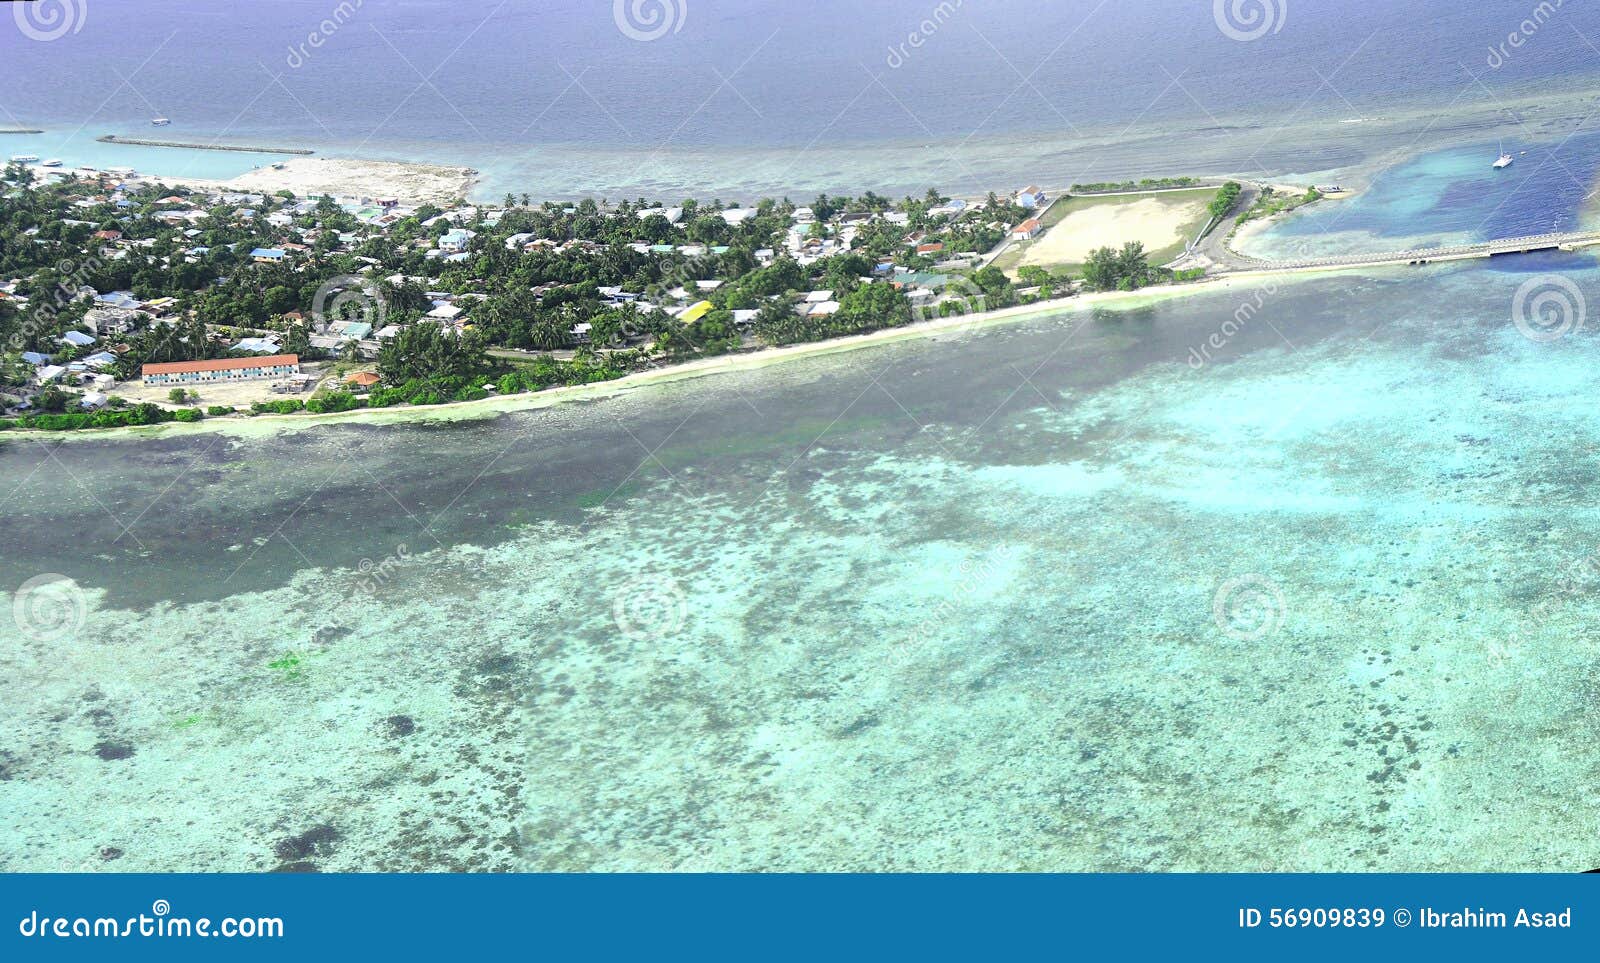 Addu Atoll or the Seenu Atoll, the South Most Atoll of the Maldives Islands  Stock Image - Image of atoll, islands: 56909839